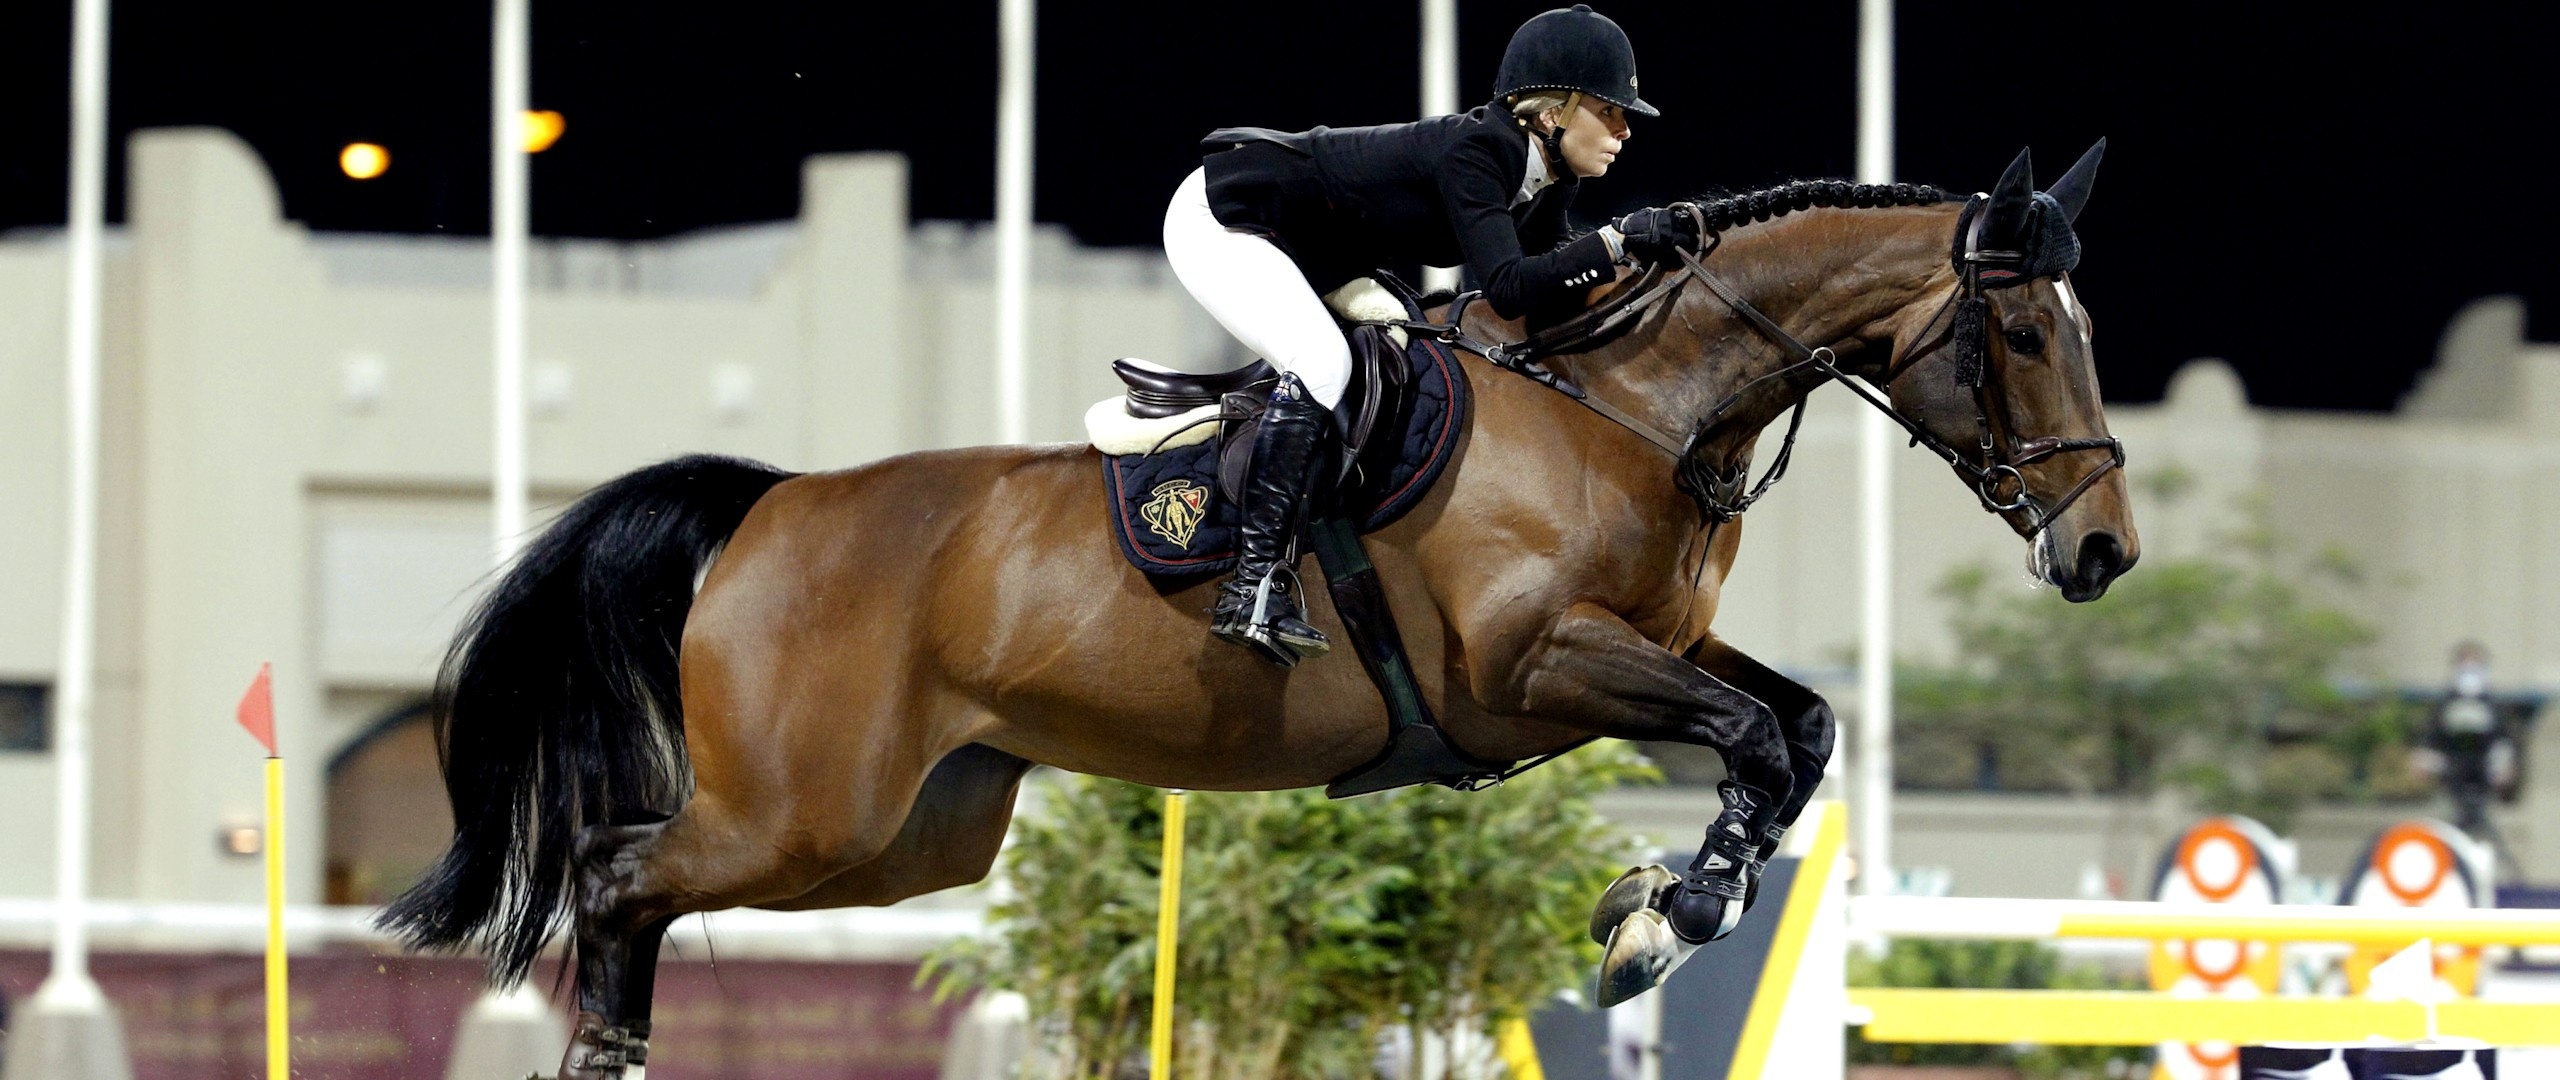 Equestrian Sports: Show jumping, A part of a group of English horse riding events that also includes dressage, eventing, hunters, and equitation. 2560x1080 Dual Screen Background.